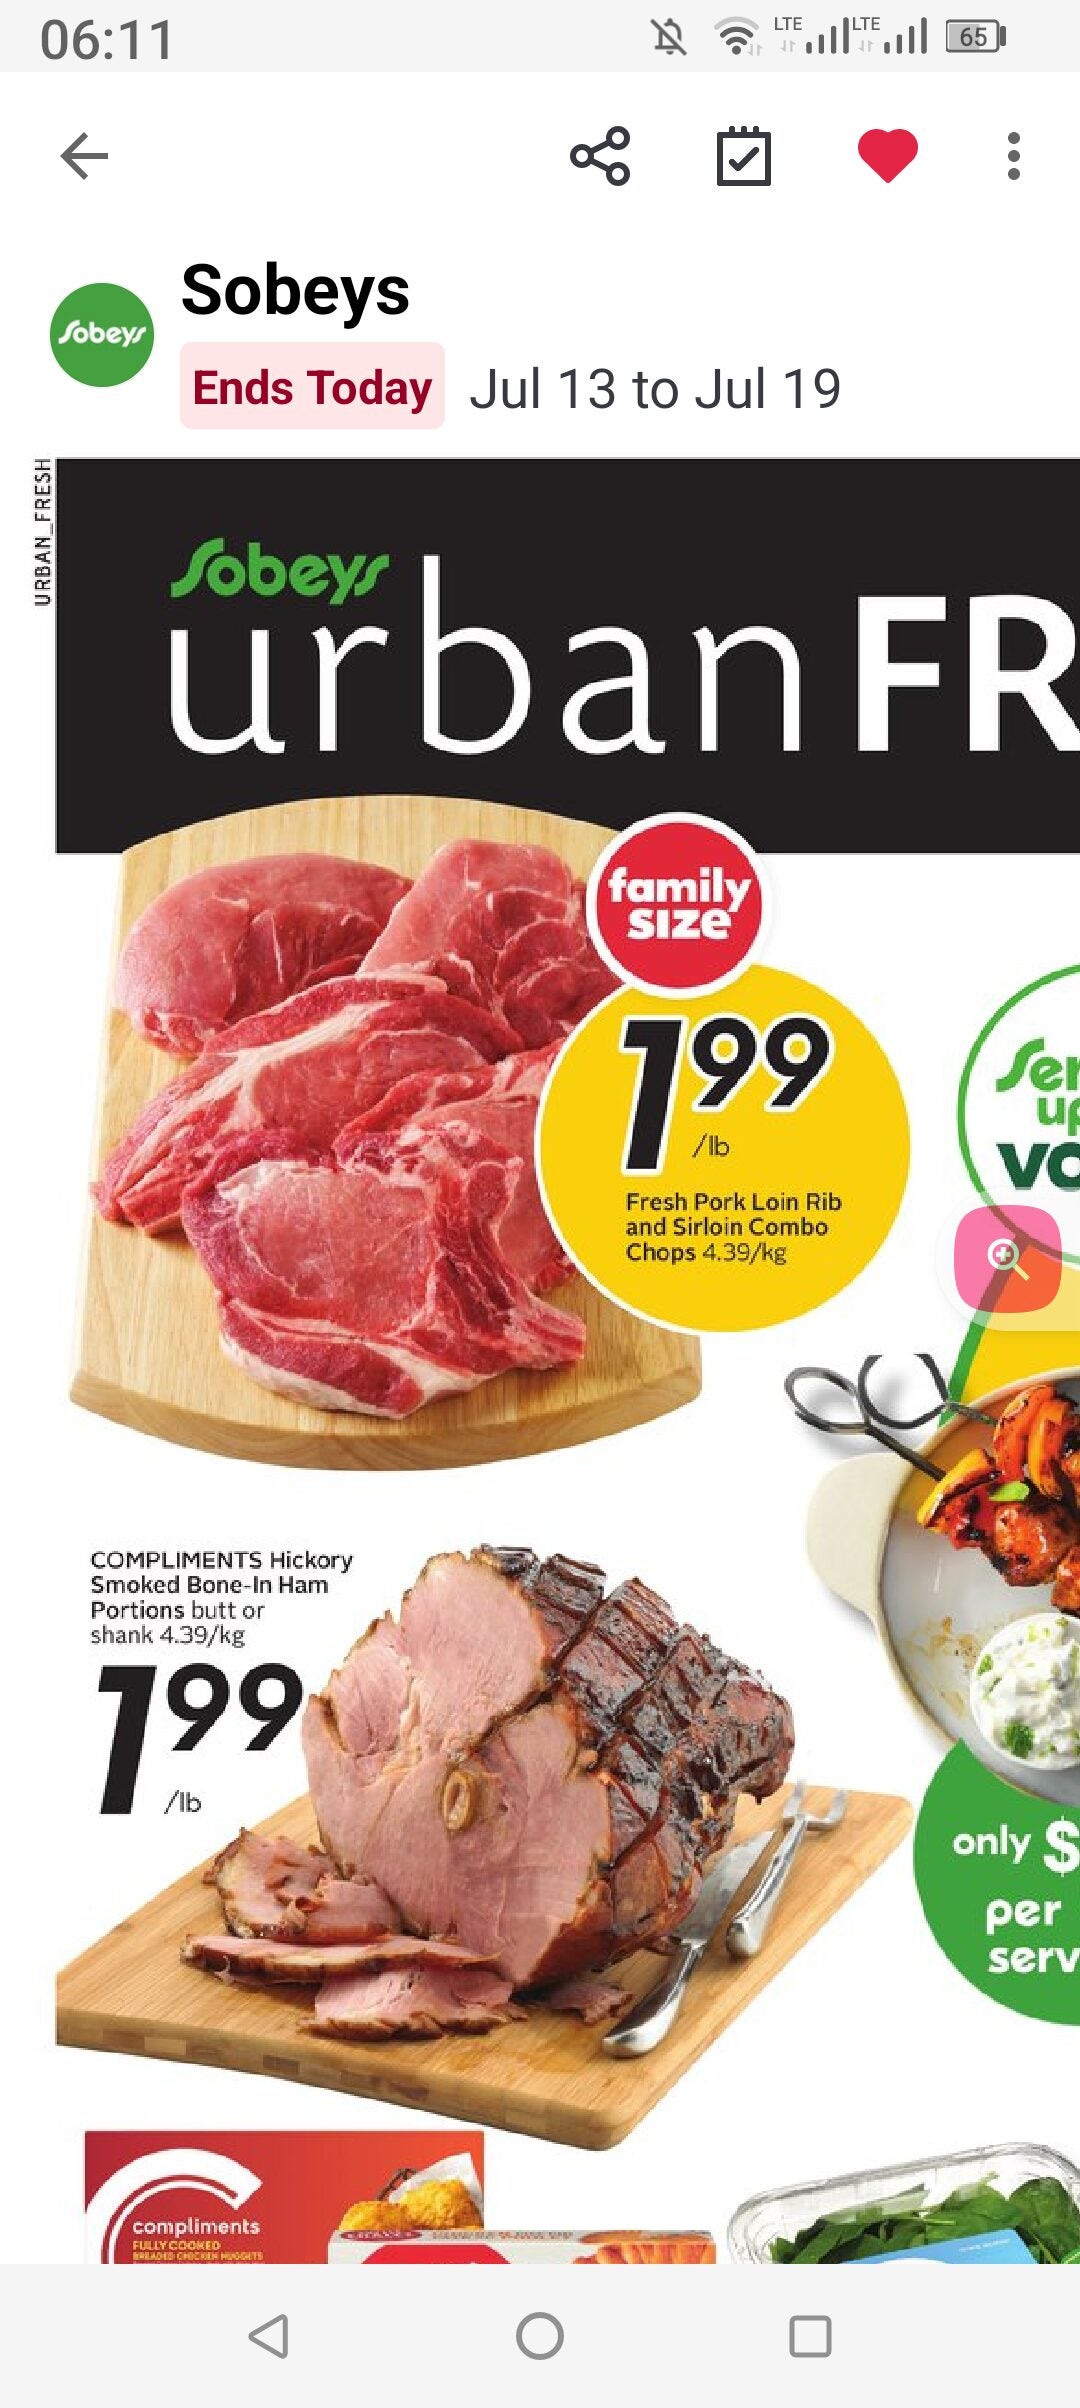 Sobeys Urban Fresh - Have you tried our hot bar yet? We've got a